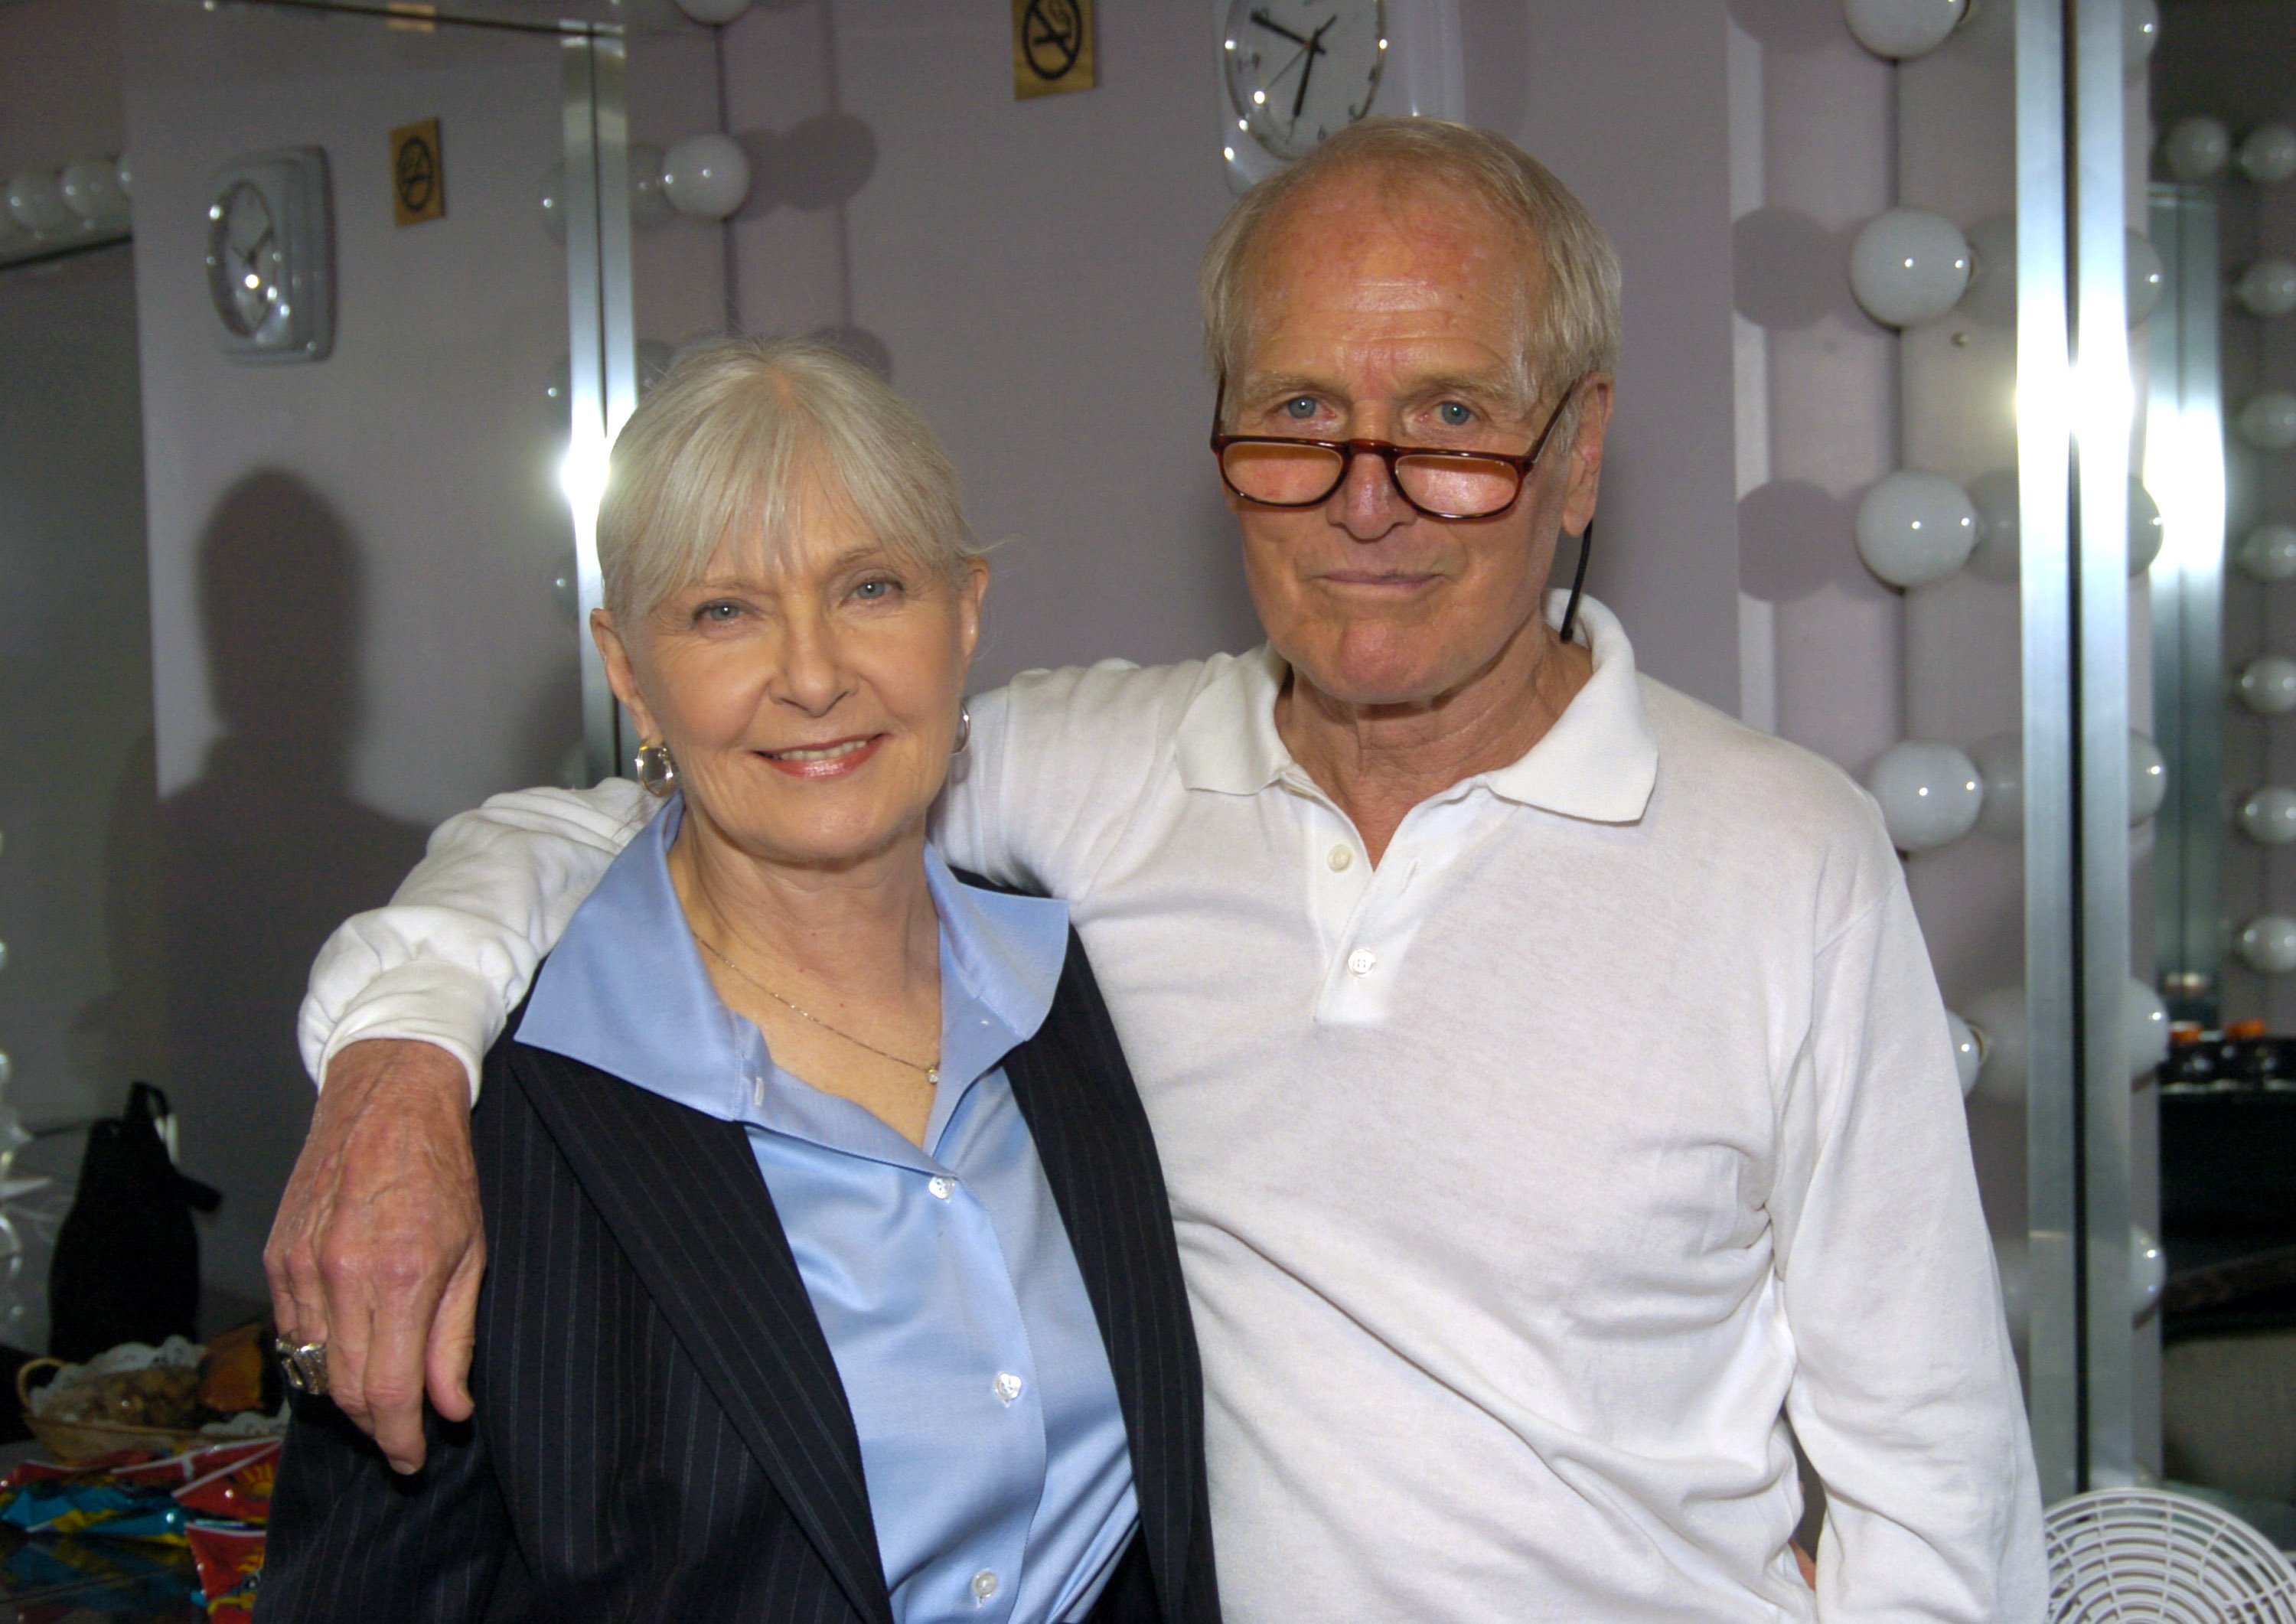 Joanne Woodward and Paul Newman at the Radio City Music Hall for "A Change Is Going To Come: The Concert for John Kerry" on July 8, 2004 in New York City | Photo: Getty Images